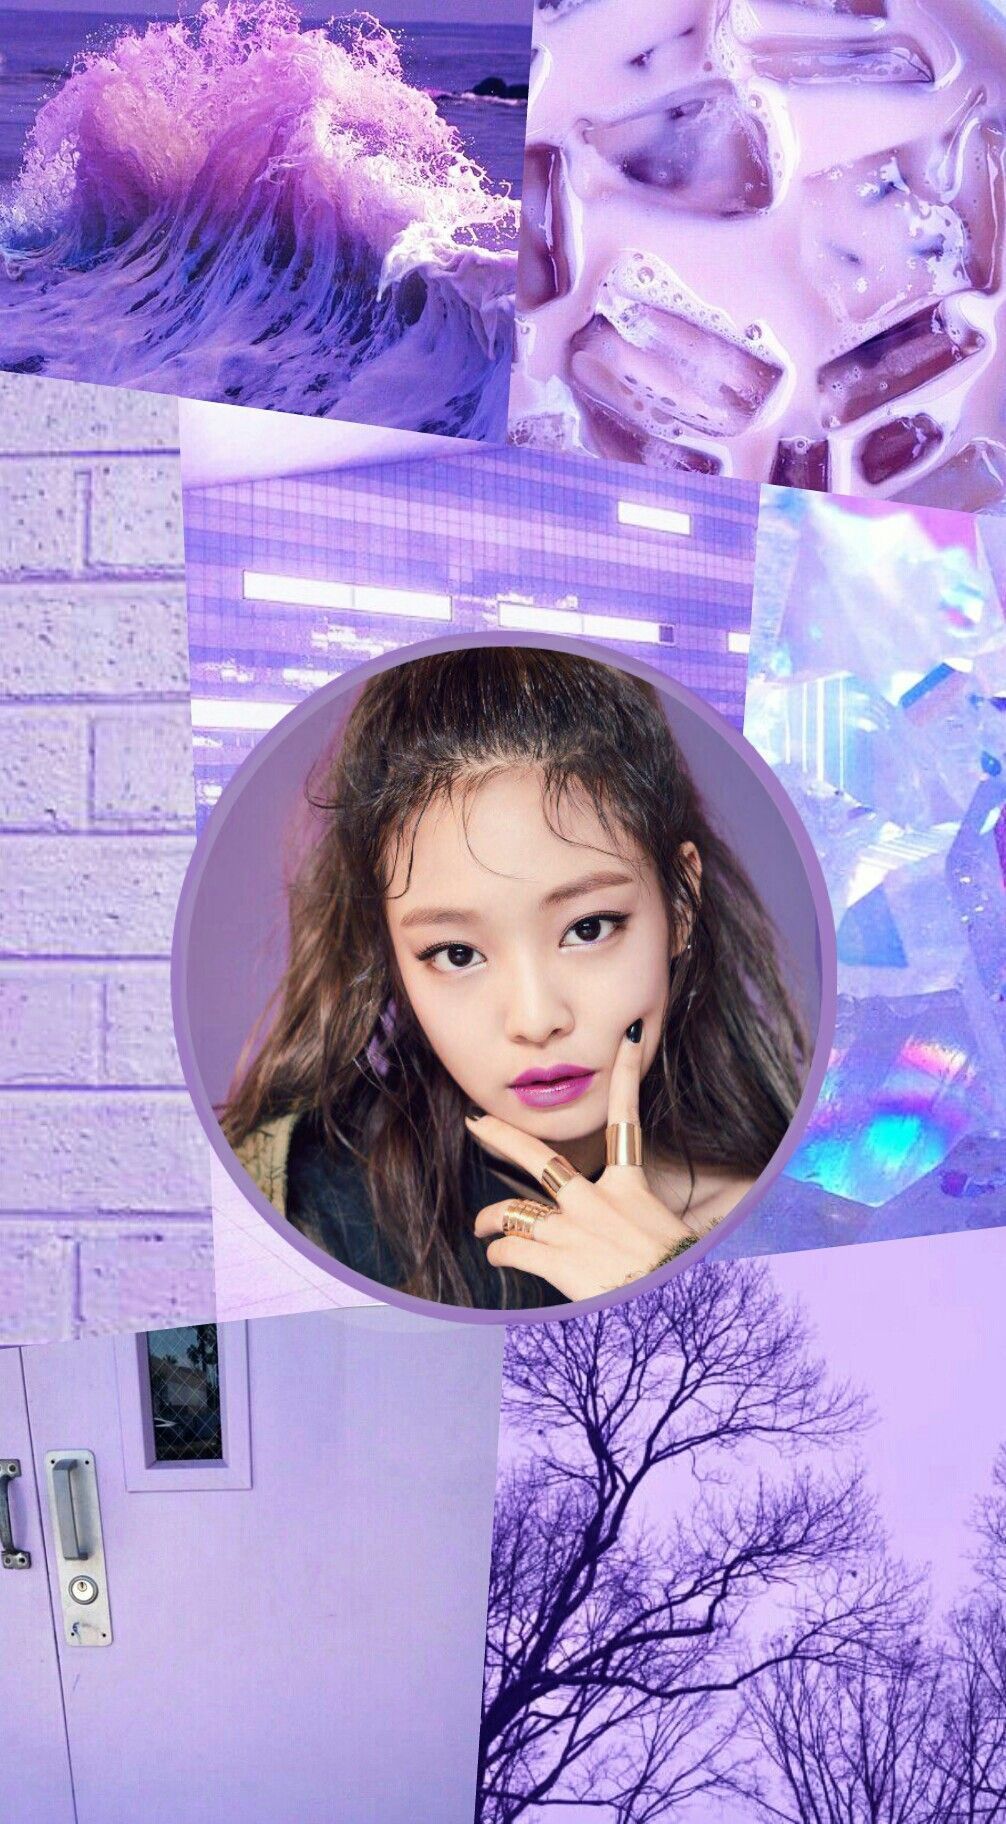 Aesthetic purple background with a picture of Ros of BLACKPINK - Jennie